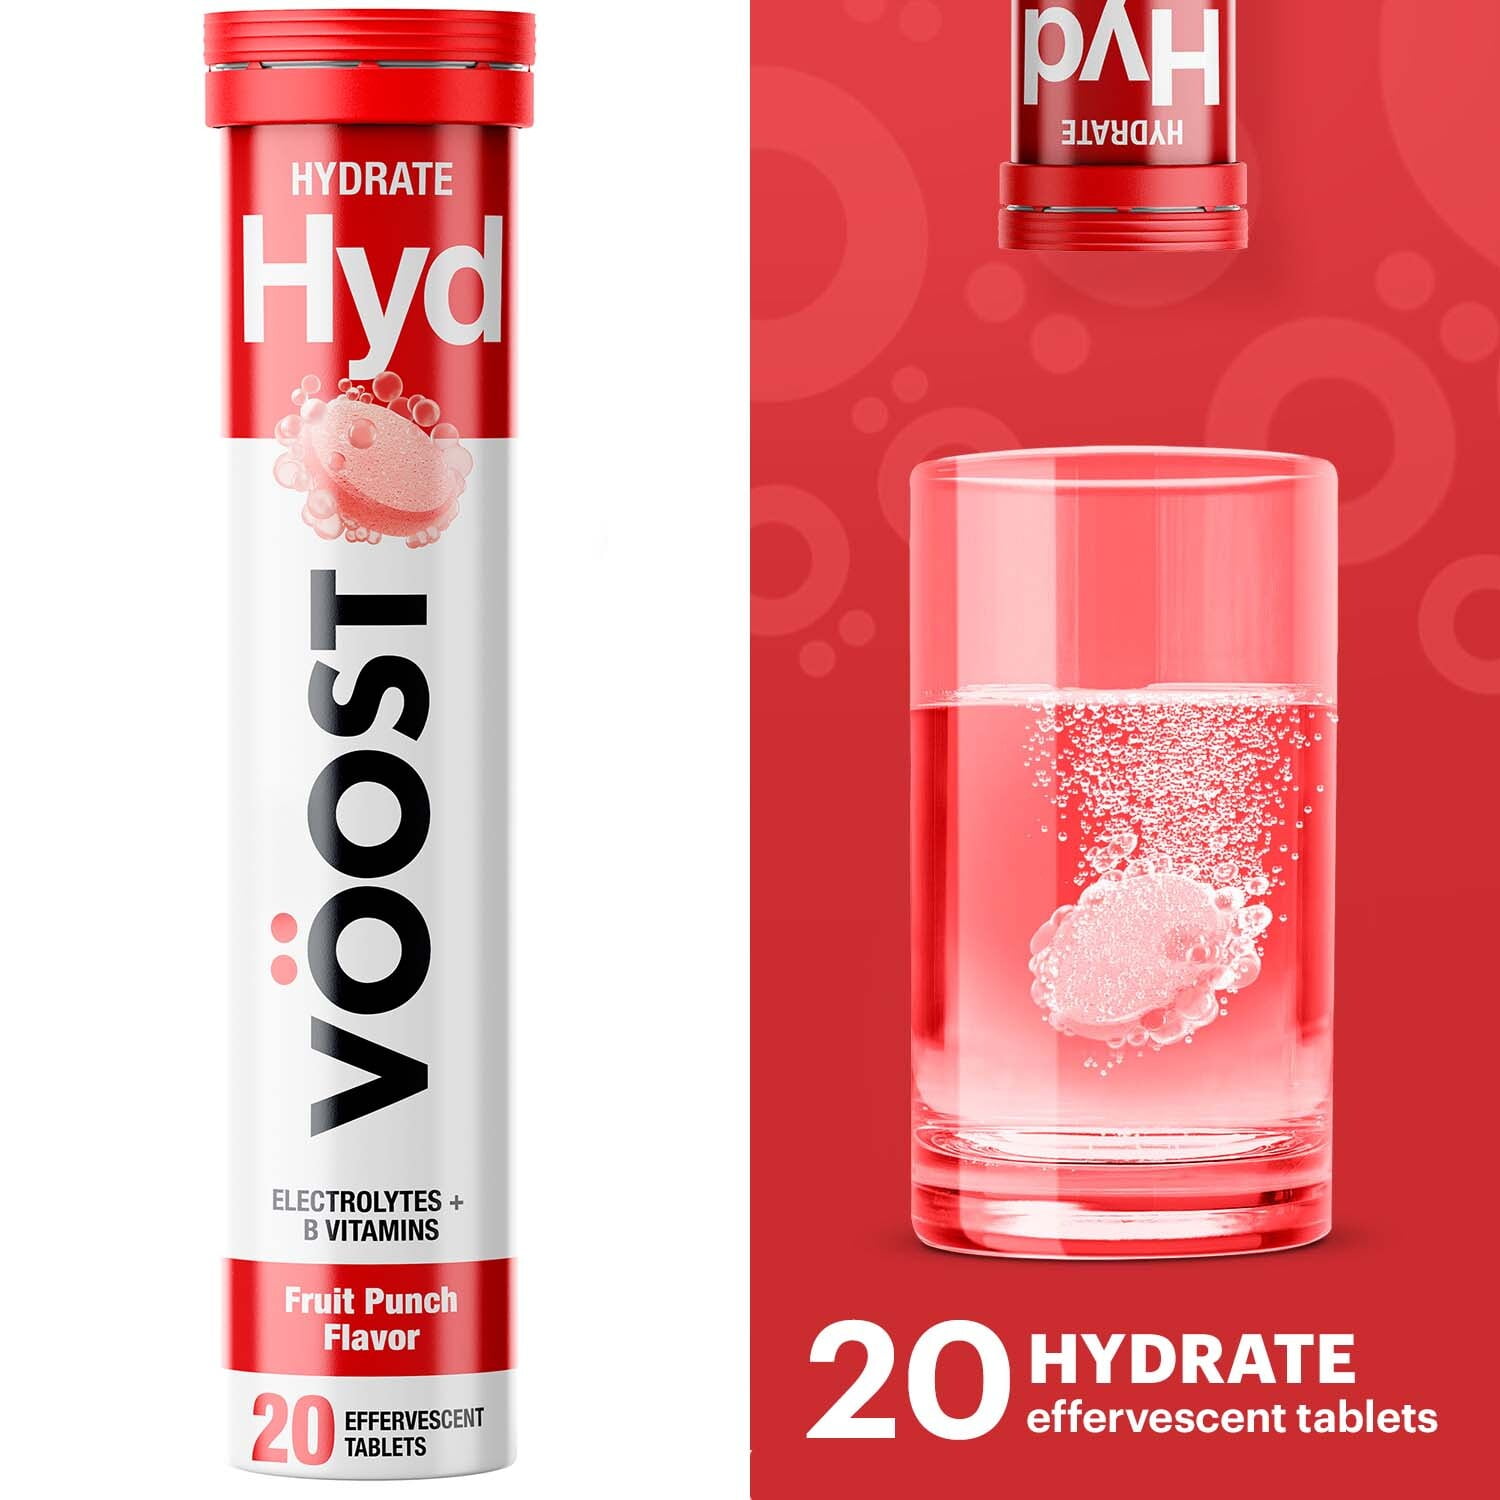 VOOST Hydrate Daily Vitamin Supplement, Effervescent Vitamin Drink Tablet, Fruit Punch, 20 Ct